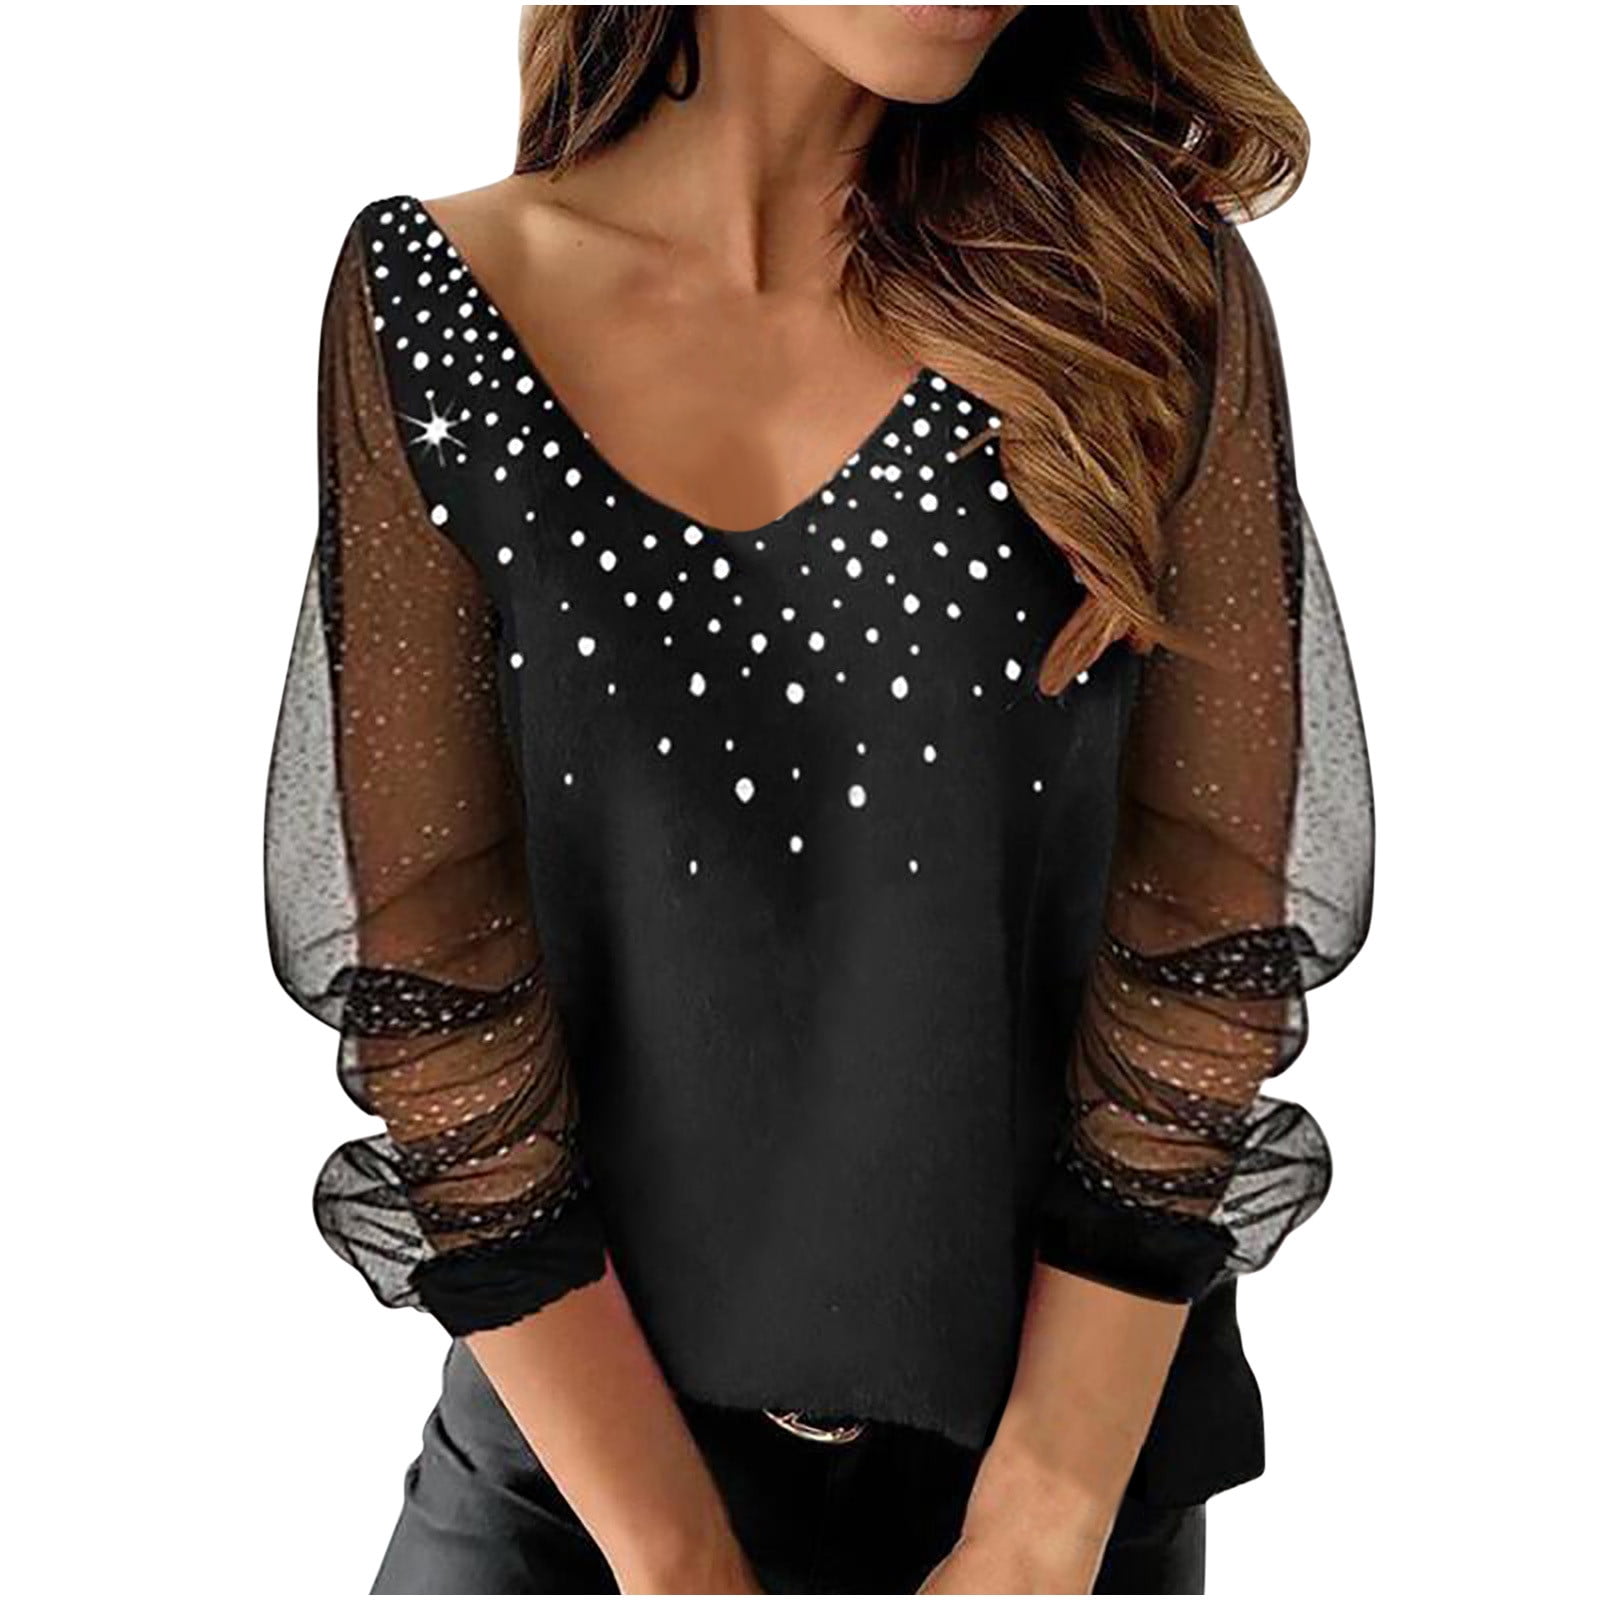 Hfyihgf Women's Casual V Neck Tops Long Sleeve T Shirts Sequin Sheer Mesh  Patchwork Blouses and Tops Club Outfits（Heart Black,L) 